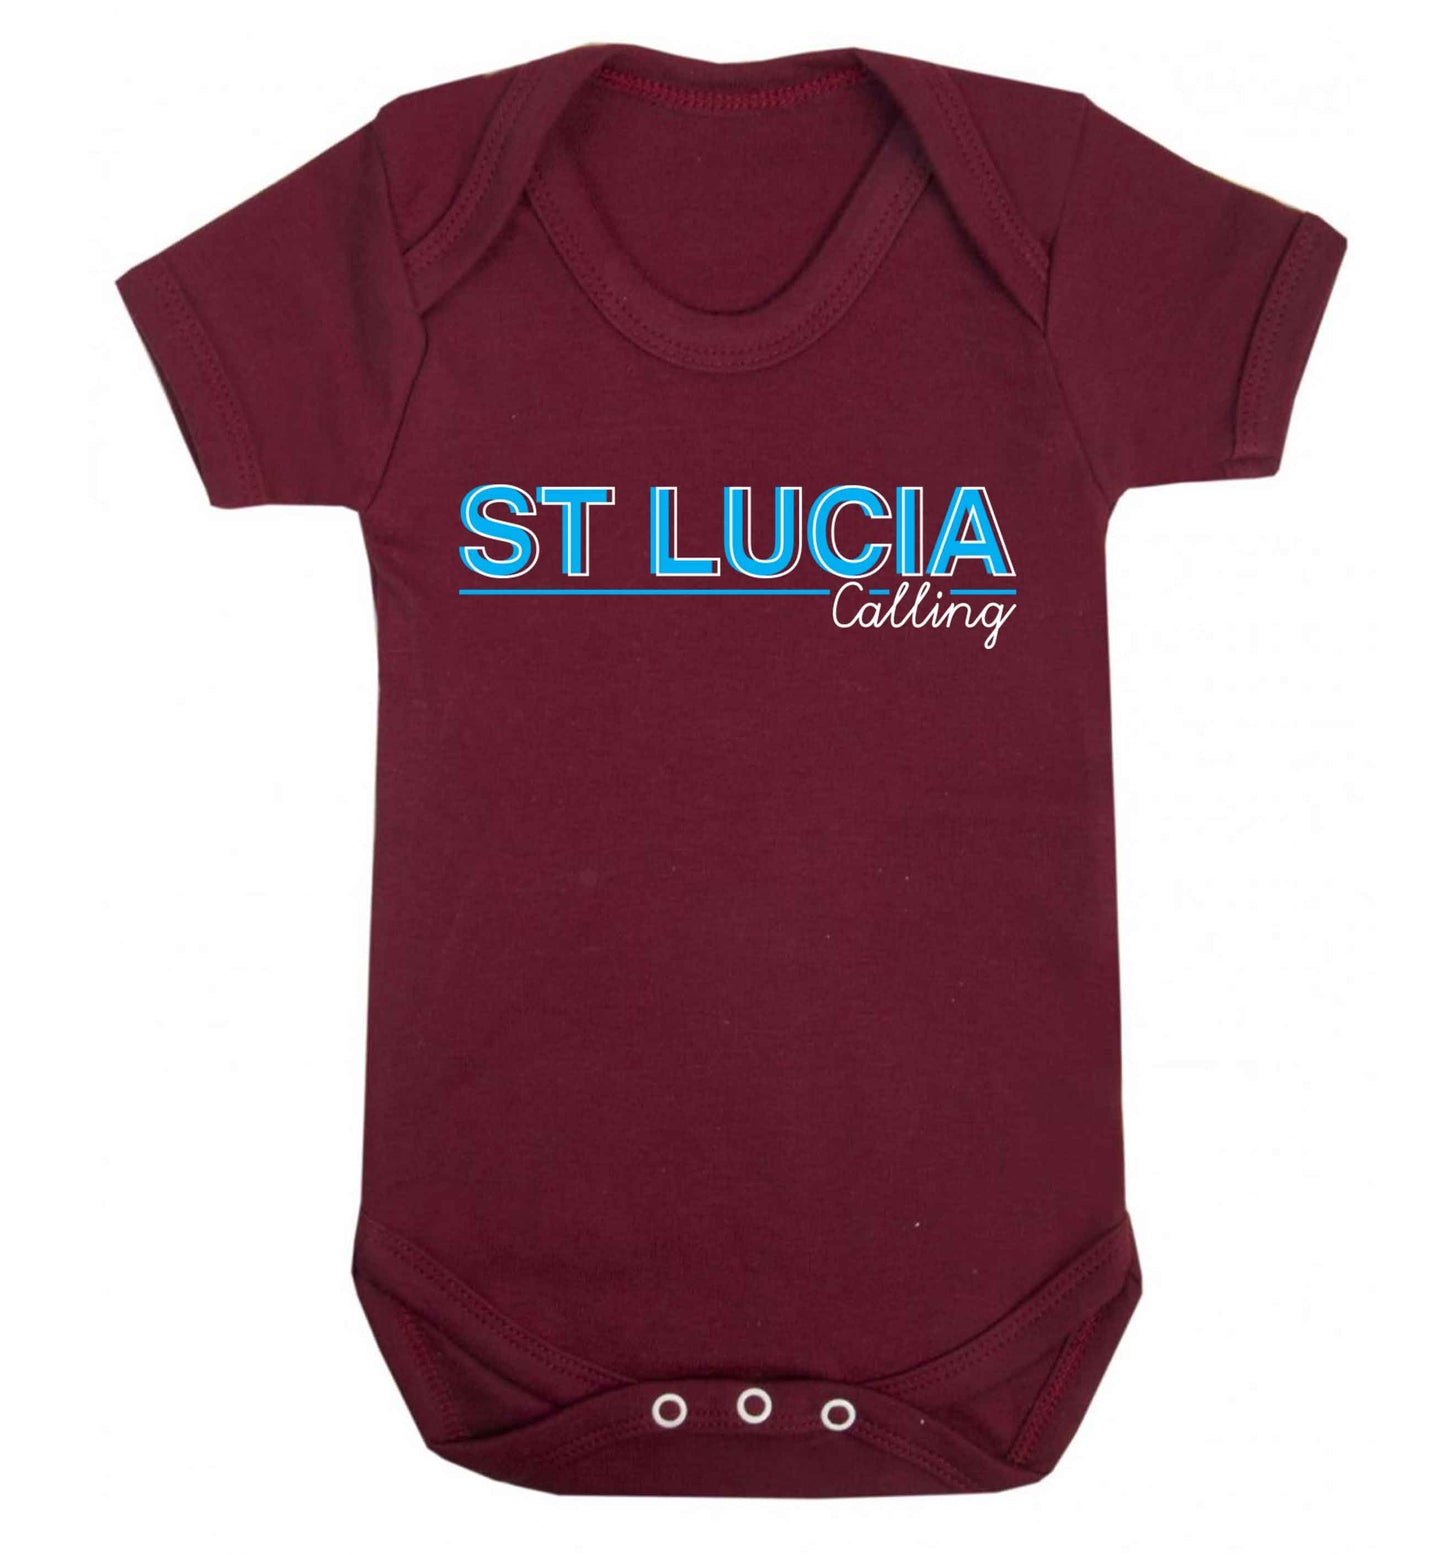 St Lucia calling Baby Vest maroon 18-24 months